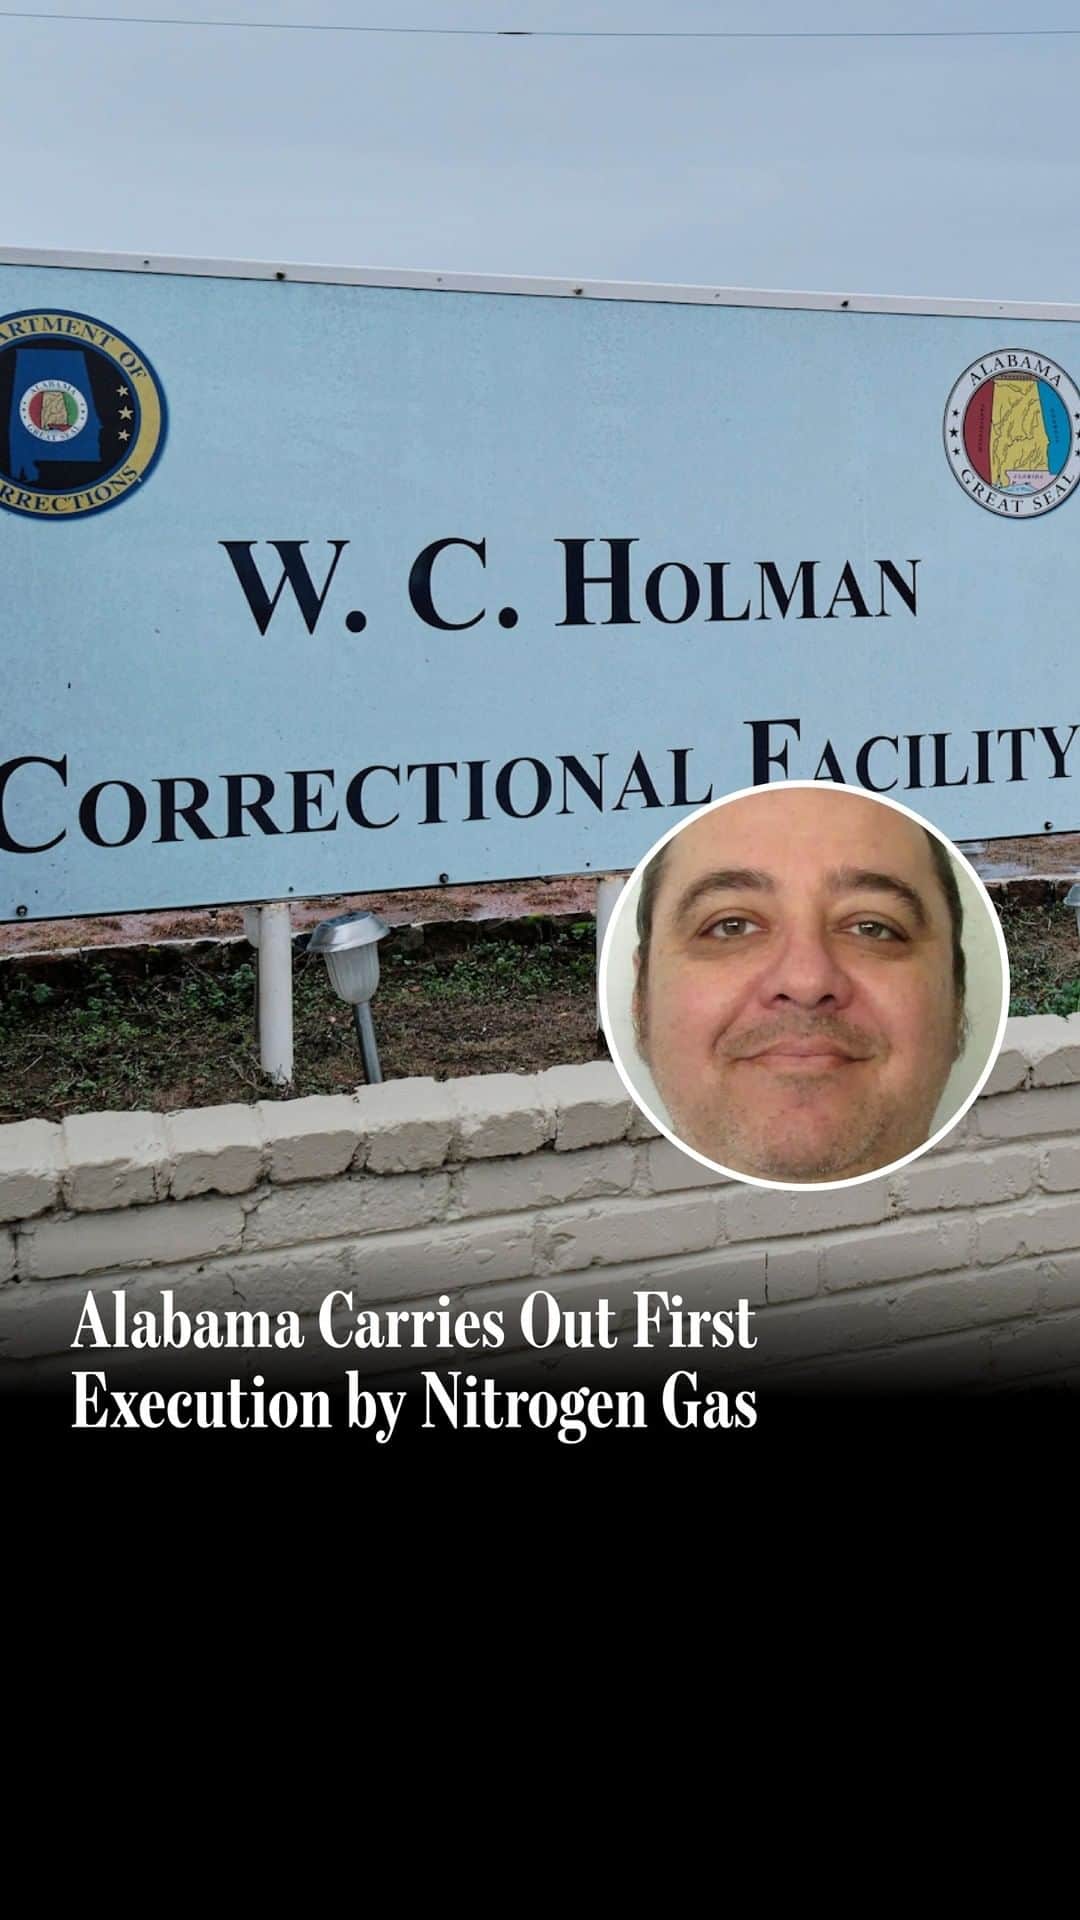 Wall Street Journalのインスタグラム：「Alabama executed an inmate using nitrogen hypoxia, becoming the first U.S. state to carry out the procedure.⁠ ⁠ Kenneth Eugene Smith was pronounced dead at 8:25 p.m. on Thursday, according to Alabama Attorney General Steve Marshall.⁠ ⁠ Read more at the link in our bio.⁠ ⁠ Photos: Dan Anderson/Shutterstock, Alabama Department of Corrections via AP (inset)」